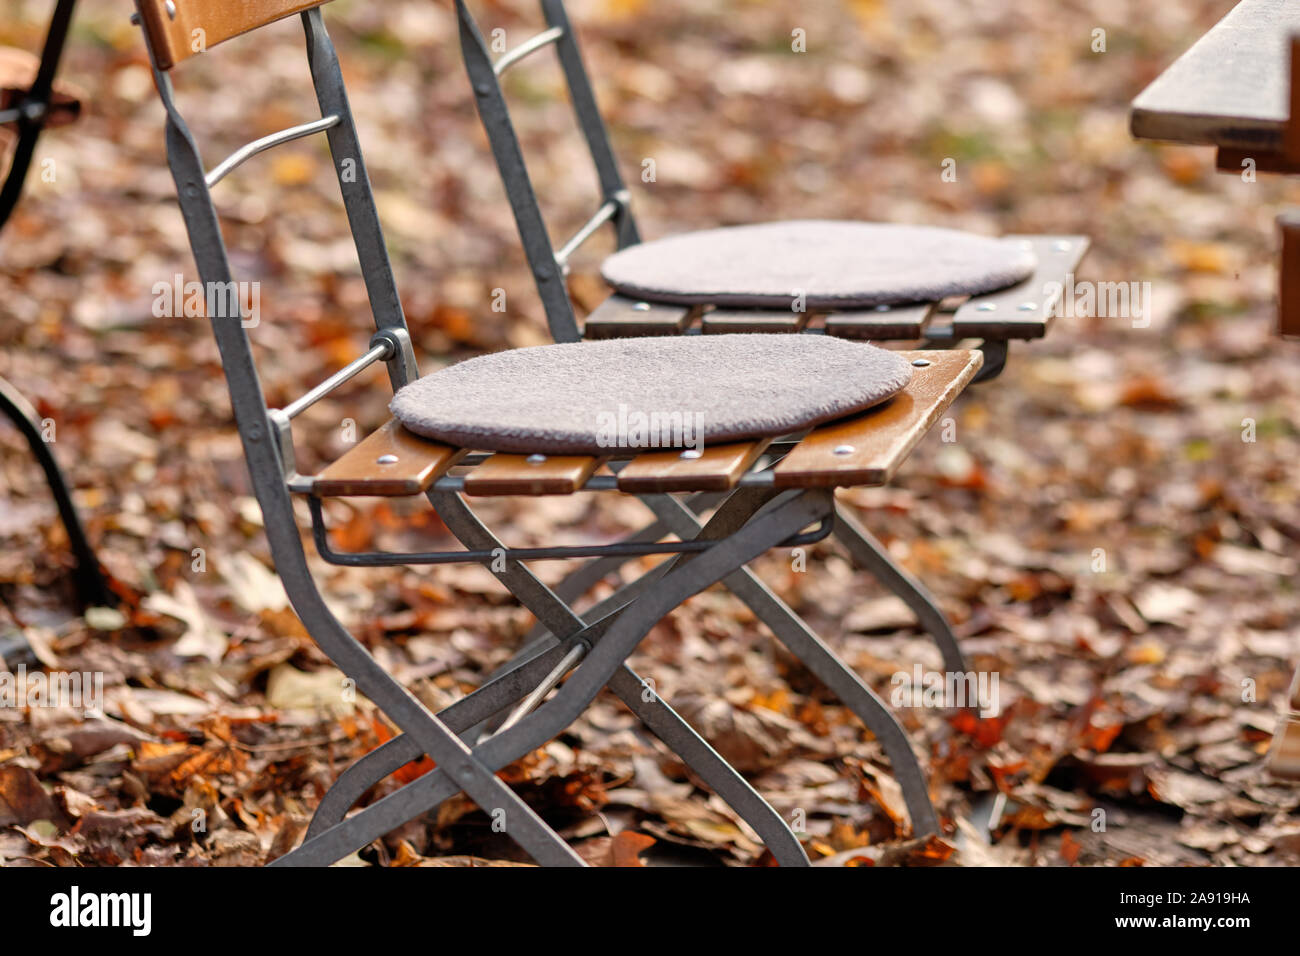 Two empty chairs made of steel and wood with seat cushions standing outdoors in a lawn covered with fallen brown autumn foliage at the end of season. Stock Photo